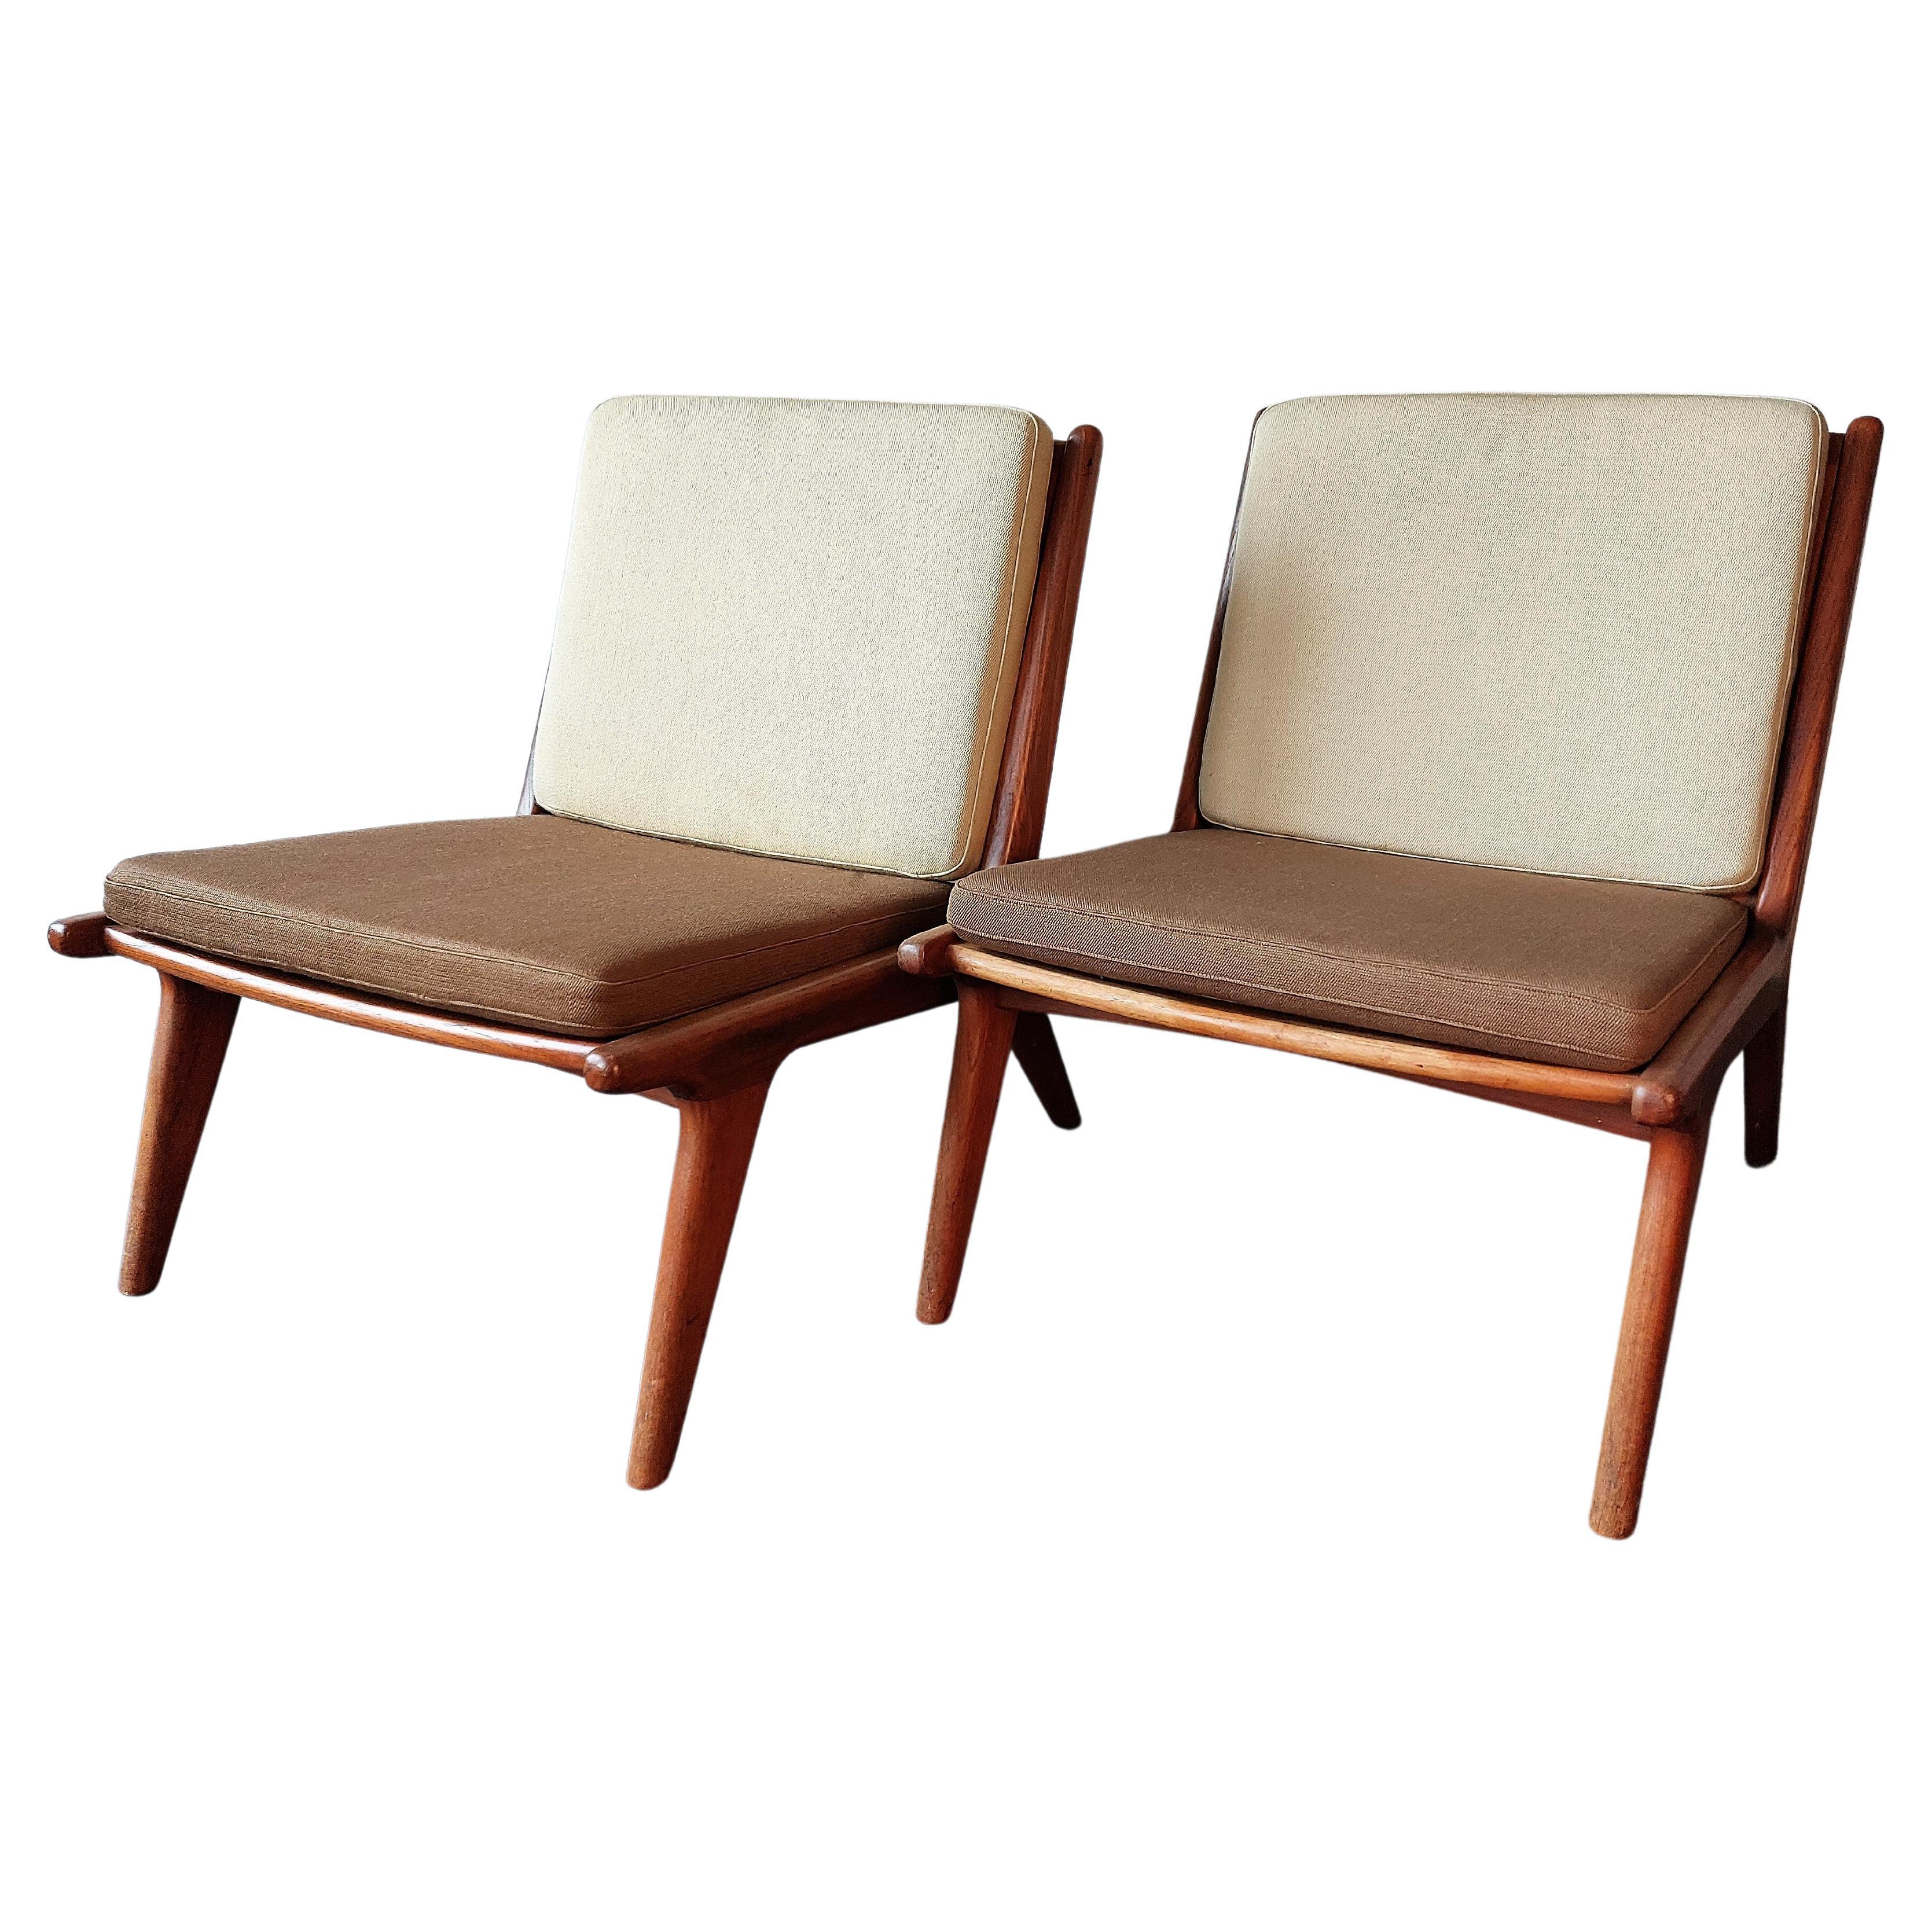 A beautiful set of 2 vintage lounge or slipper chairs, most likely made in Denmark. The chairs have a minimalist wooden frame made by fine craftmanship, that is in a good and solid condition. The cushions have their original fabric and the